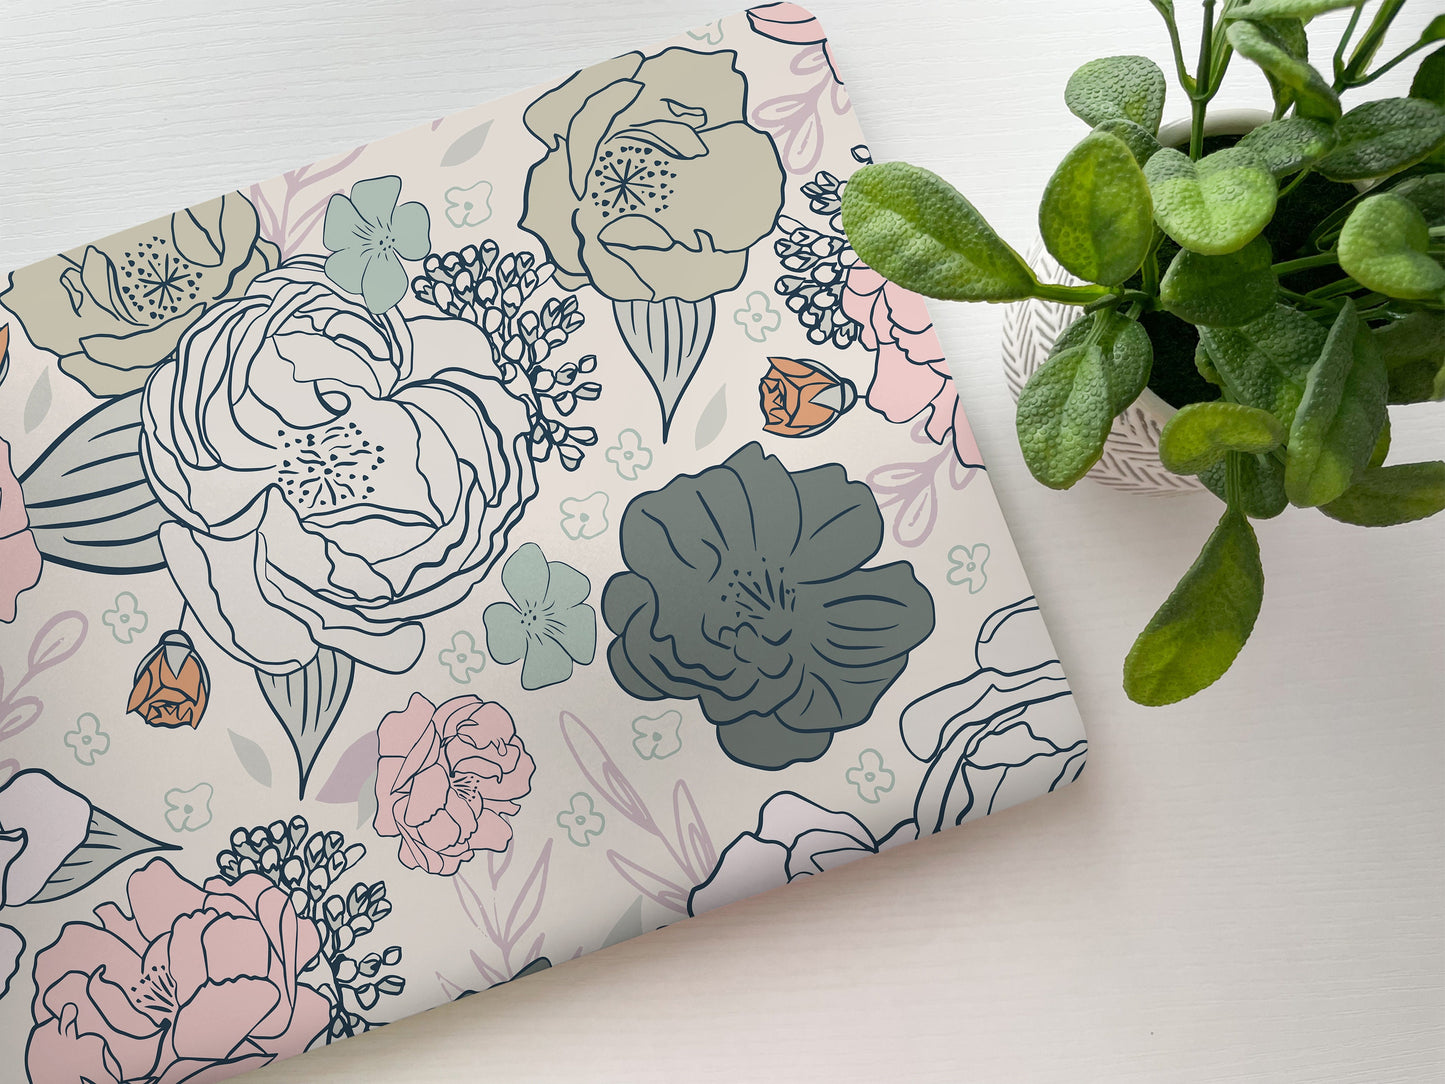 Blue Pink Floral Laptop Skin, Laptop Cover, Laptop Skins, Removable Laptop Skins, Laptop Decal, Customized Laptop Full Coverage Stickers, 19 - James & Inks